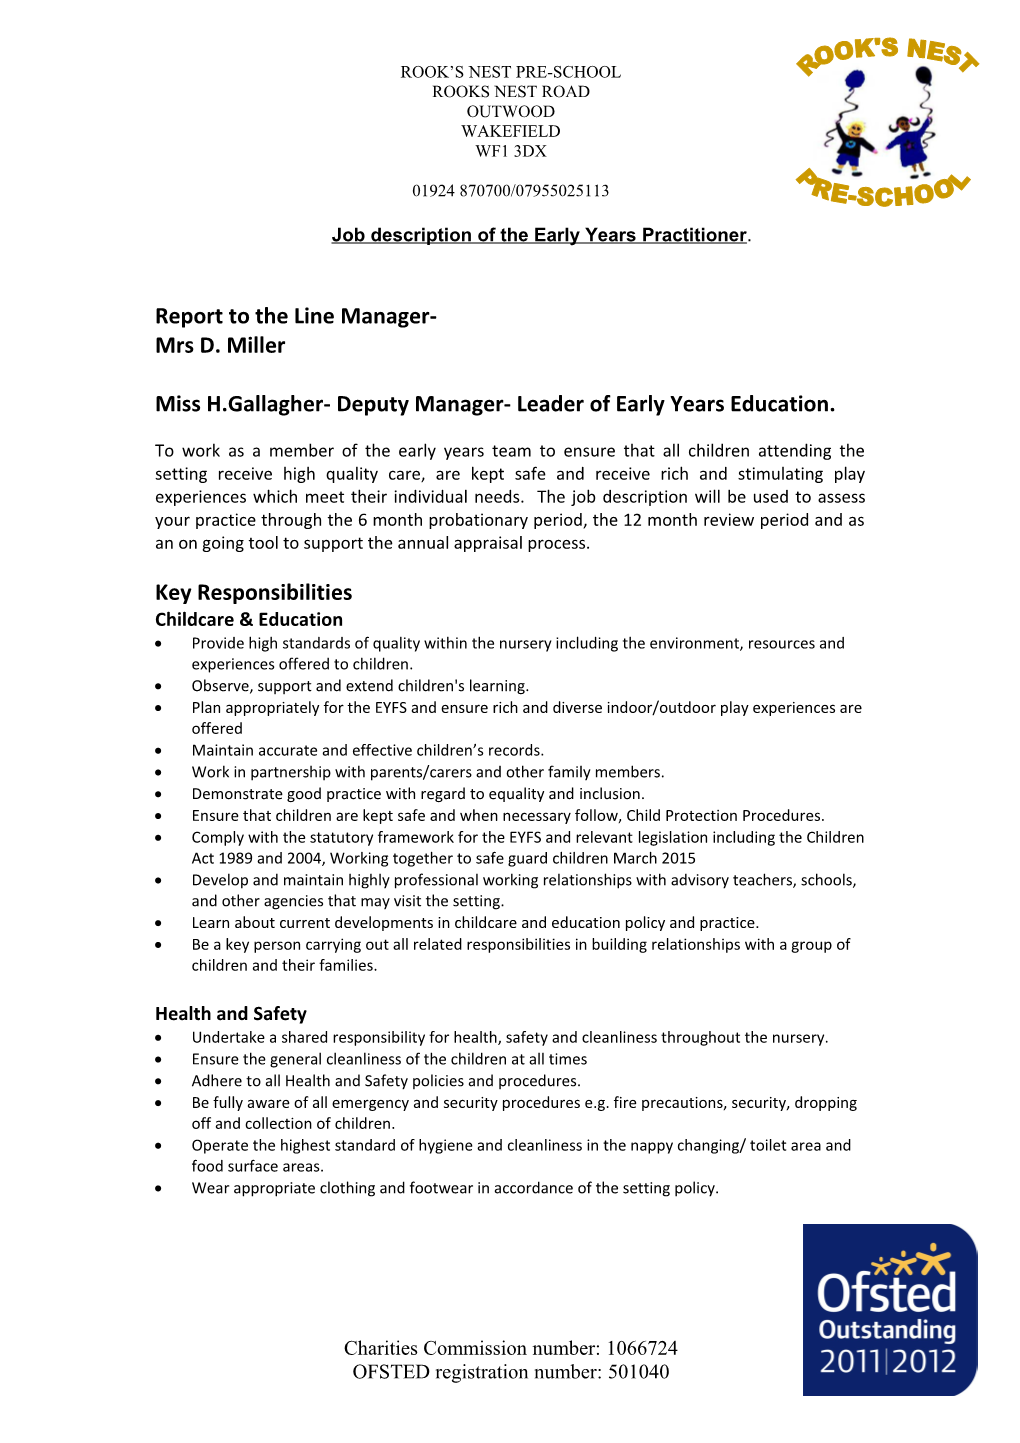 Job Description of the Early Years Practitioner